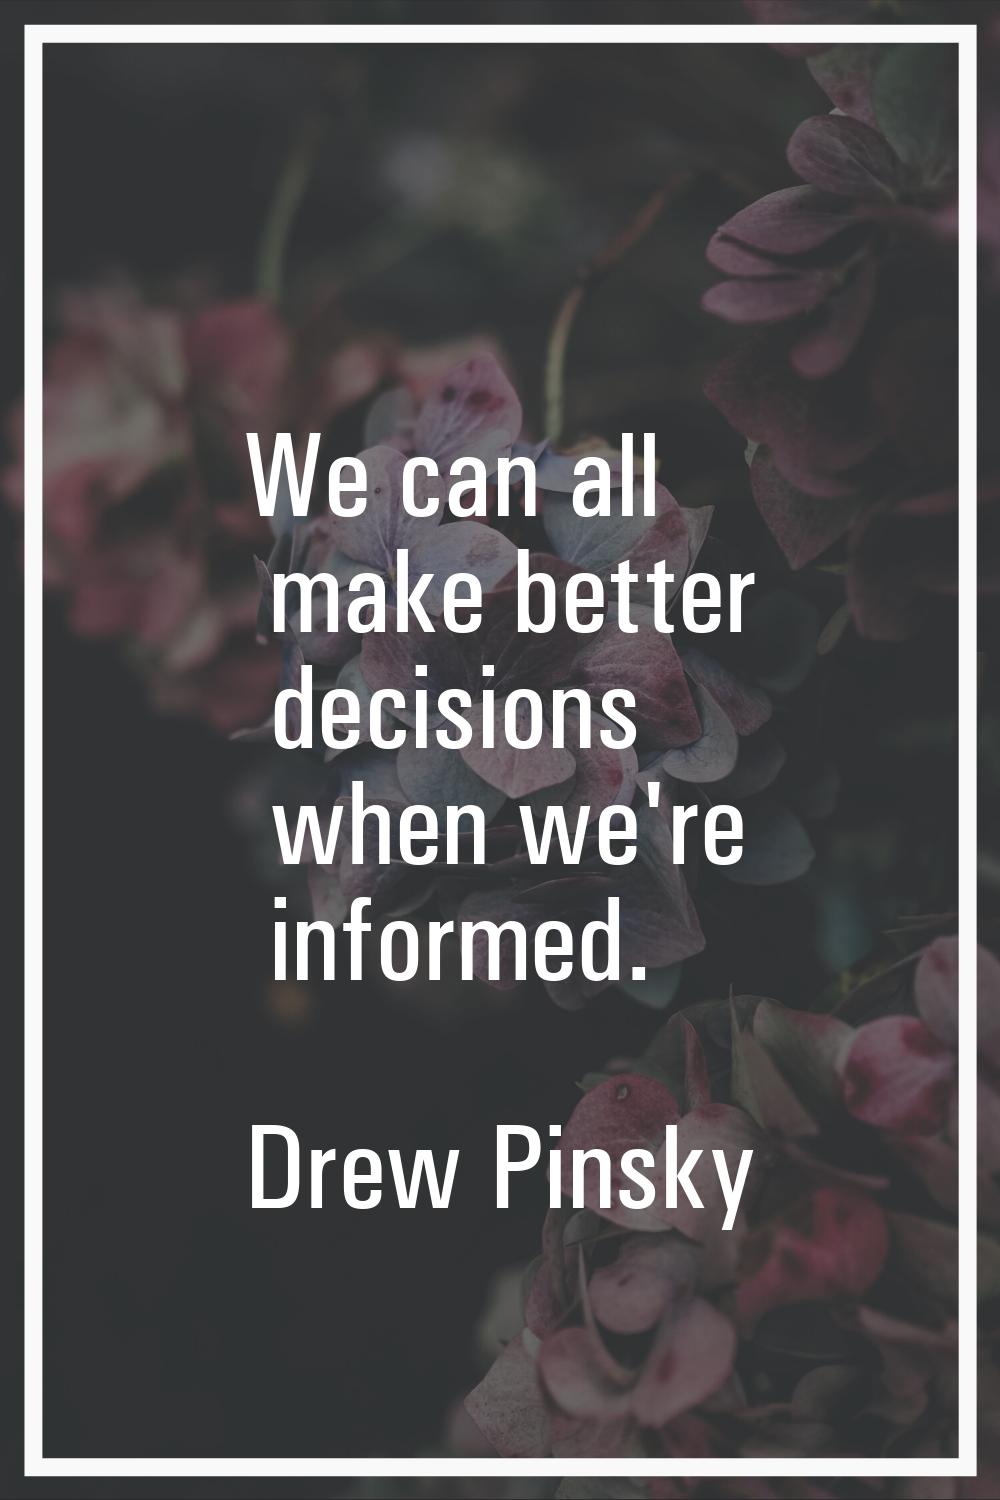 We can all make better decisions when we're informed.